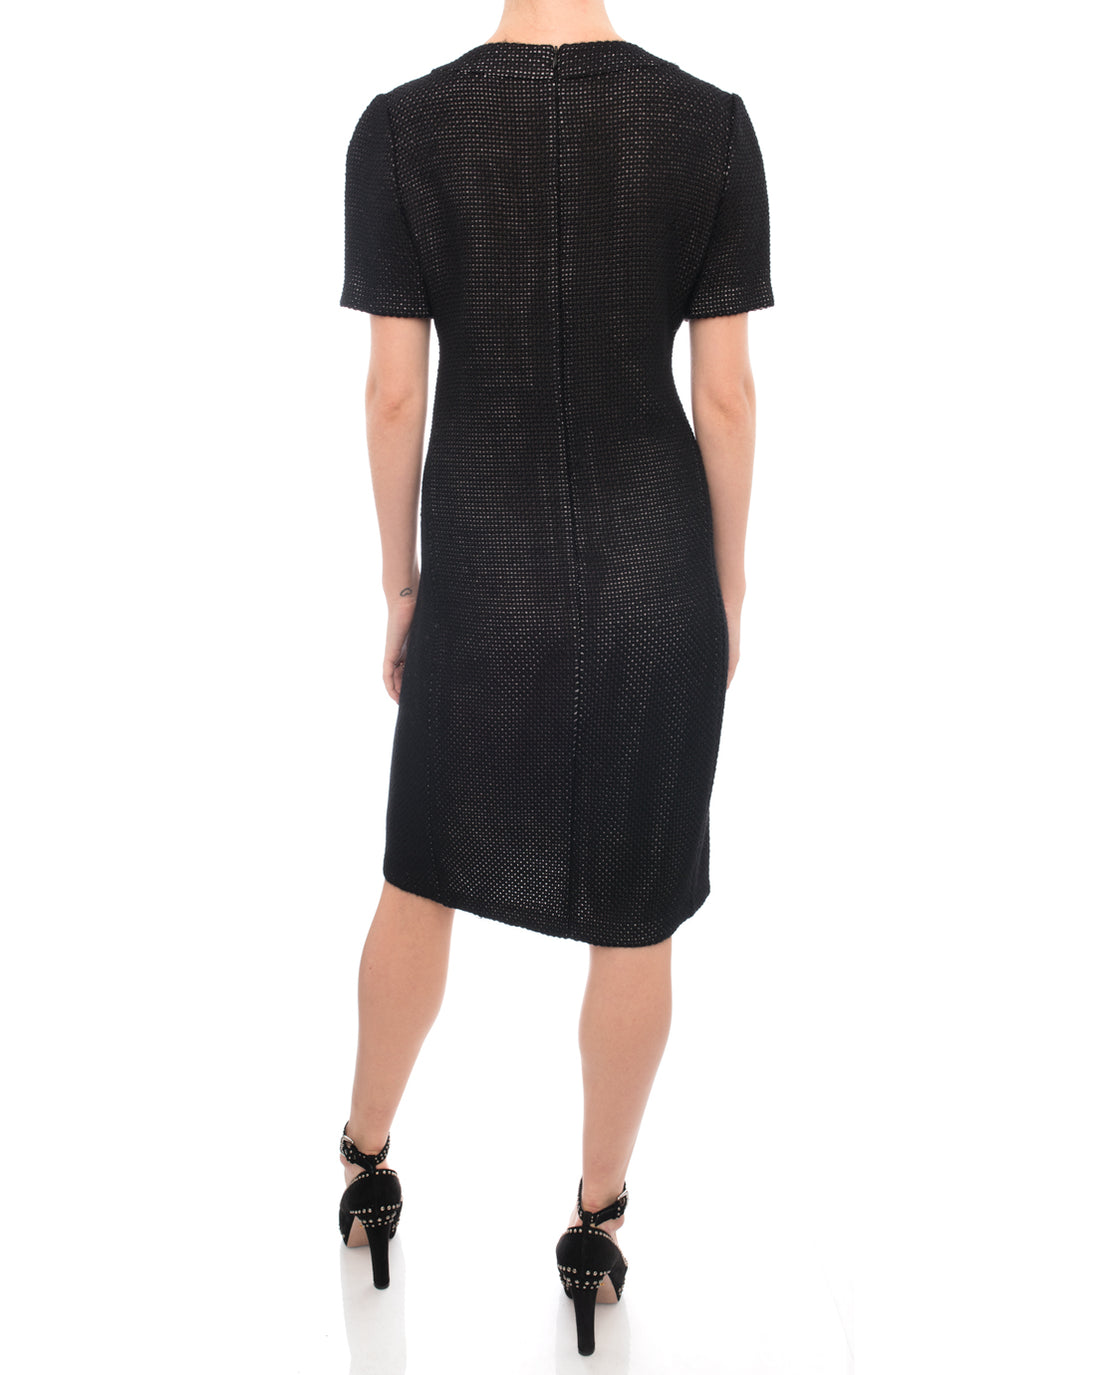 Fendi Black 1960’s Style Dress with Flower Accent - 8